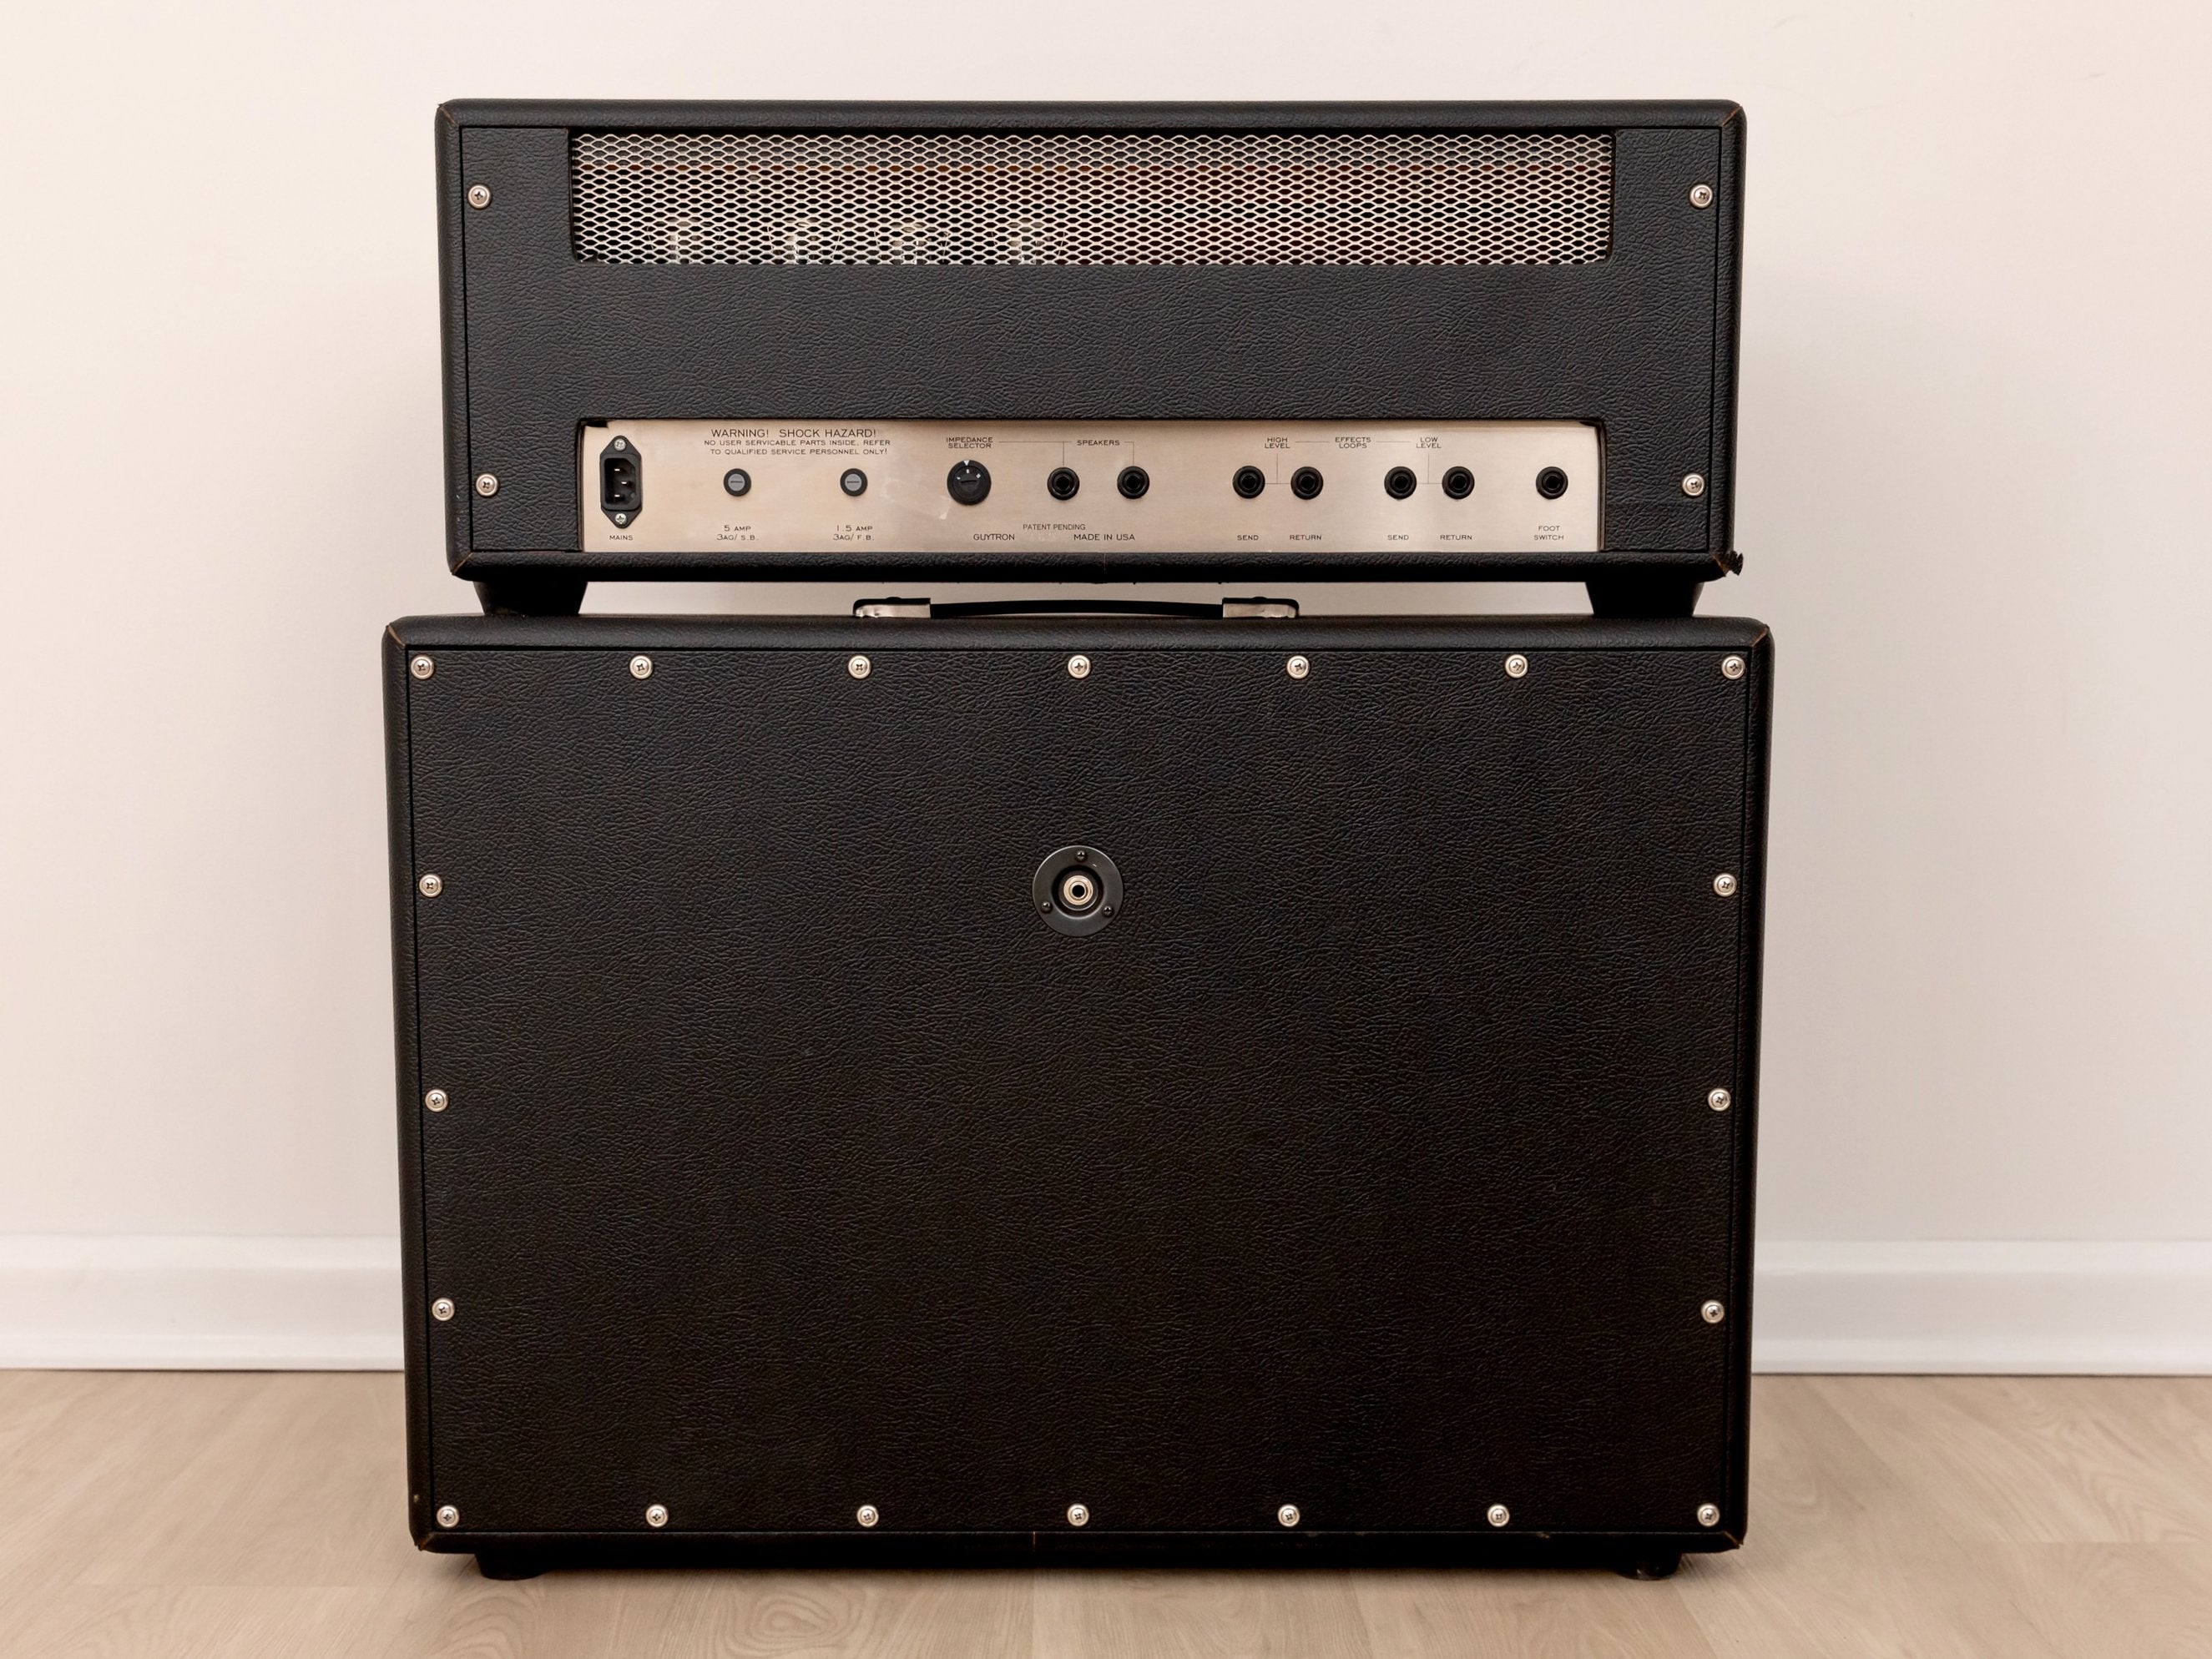 2000s Guytron GT-100 100w British-Style Boutique Tube Amp EL34 w/ 2x12, Celestion Speakers